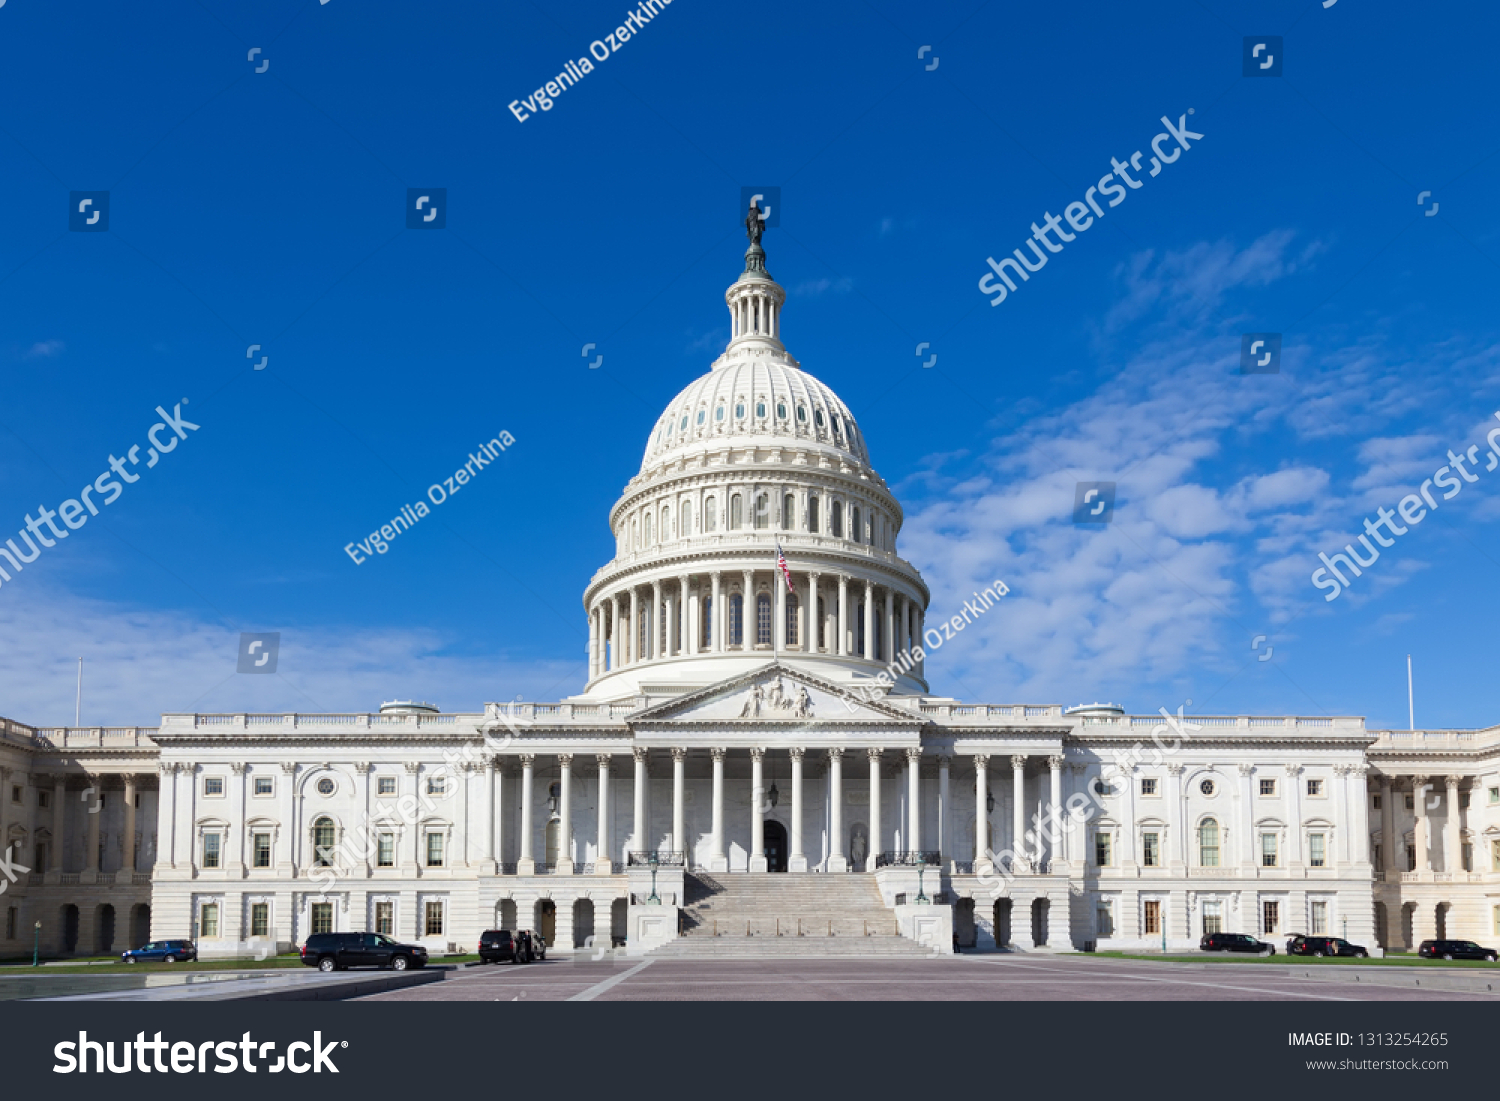  Capitol USA Building.  The United States Capitol at day.United States Congress.The east front at day.  Washington DC. USA.
 #1313254265